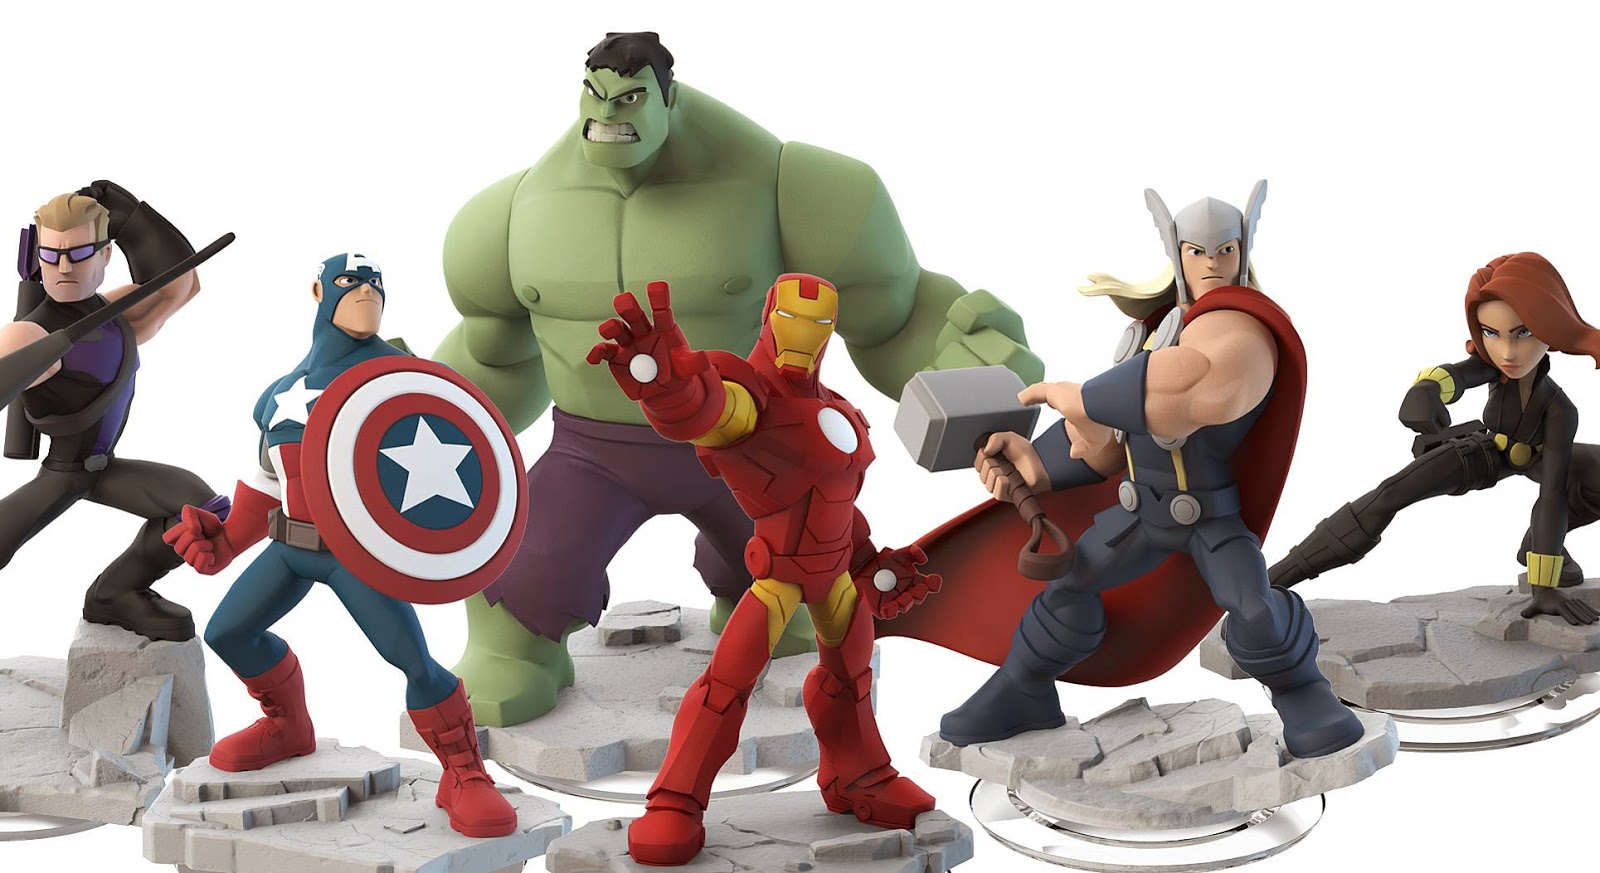 Disney Infinity Just Got A Whole Lot More Awesome.